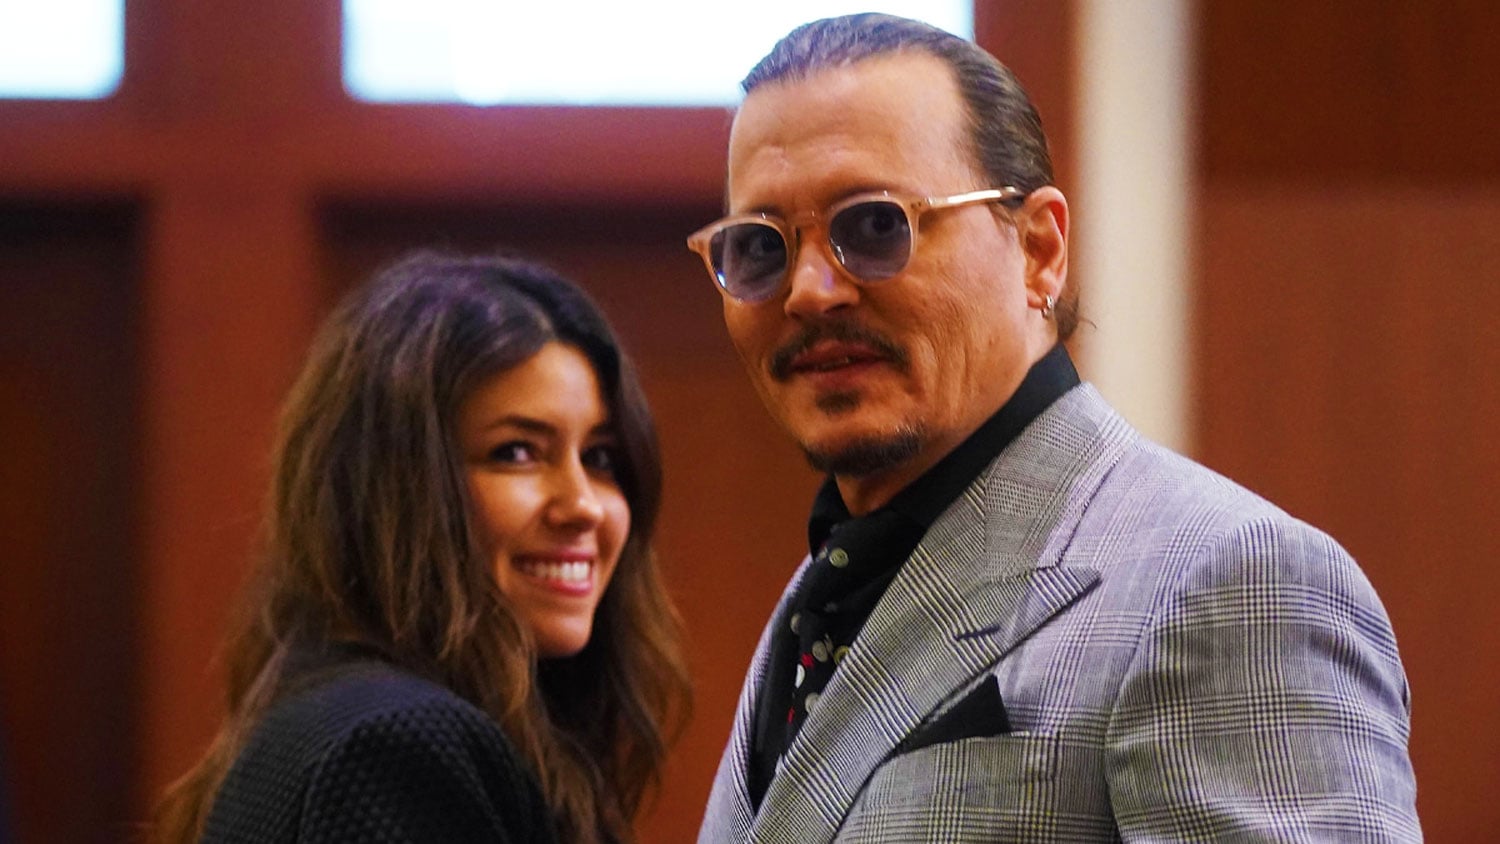 Johnny-Depp-Back-In-Court-For-Assault---Camille-Vasquez-To-The-Rescue